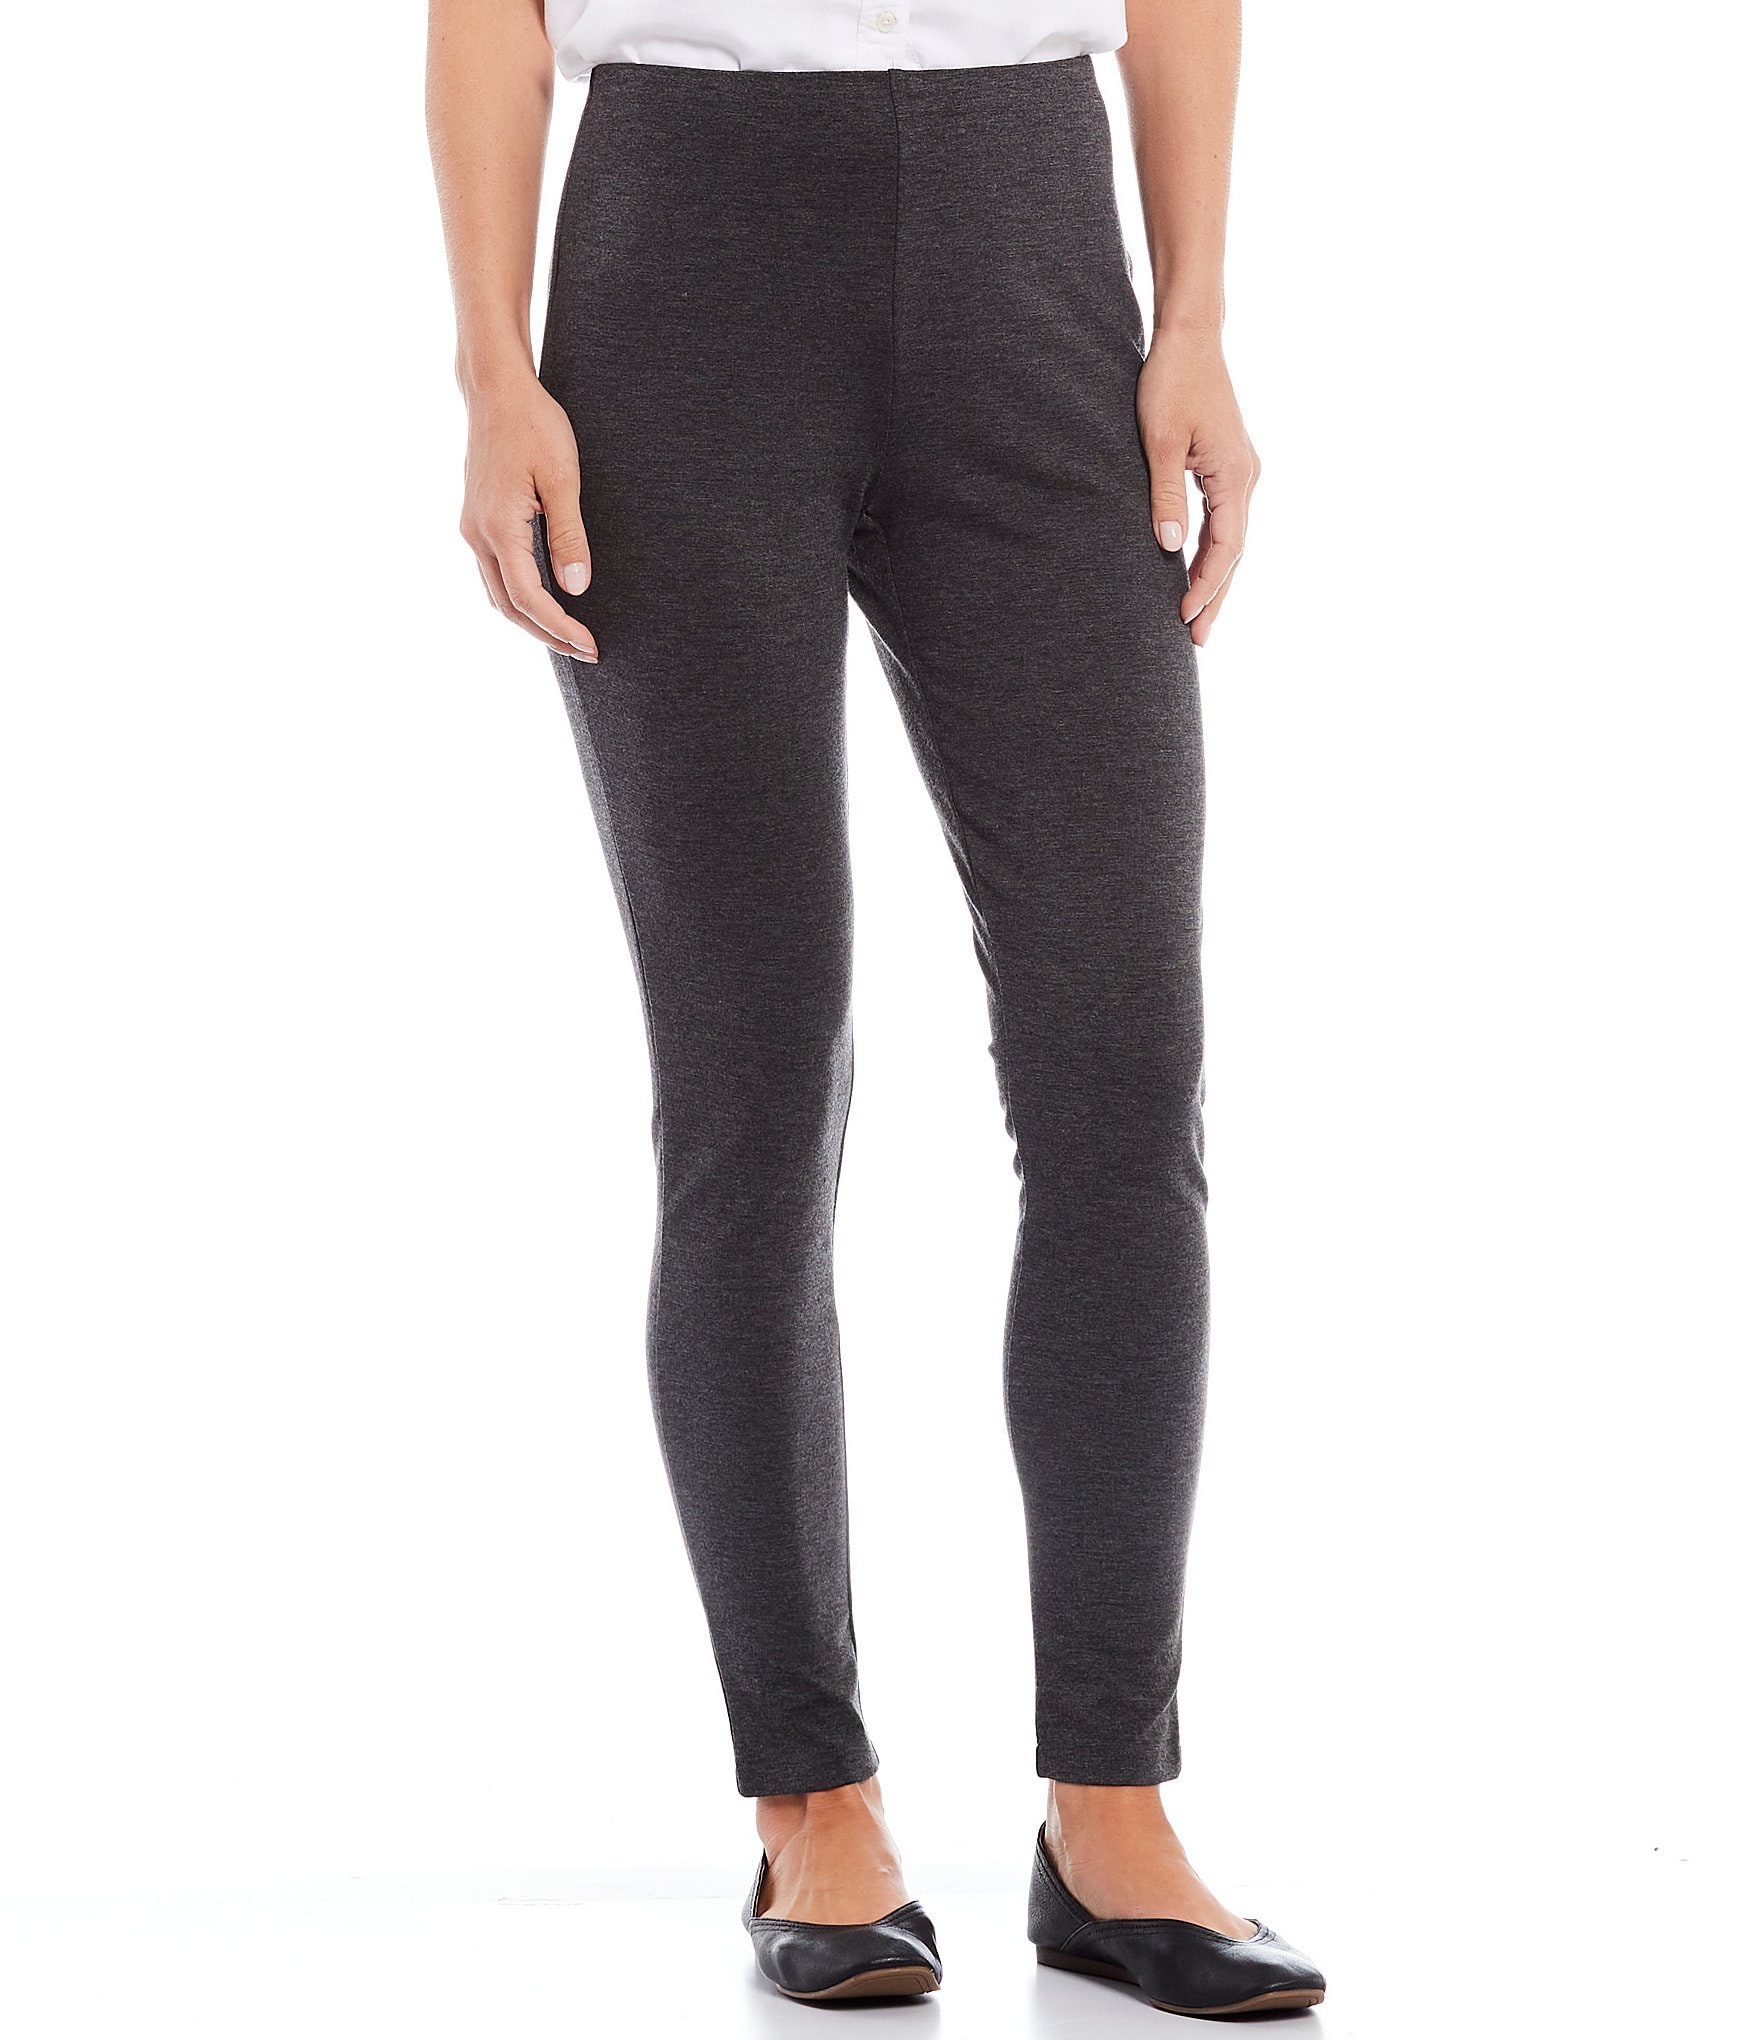 Super Soft Ankle Leggings - Love Laura Gifts